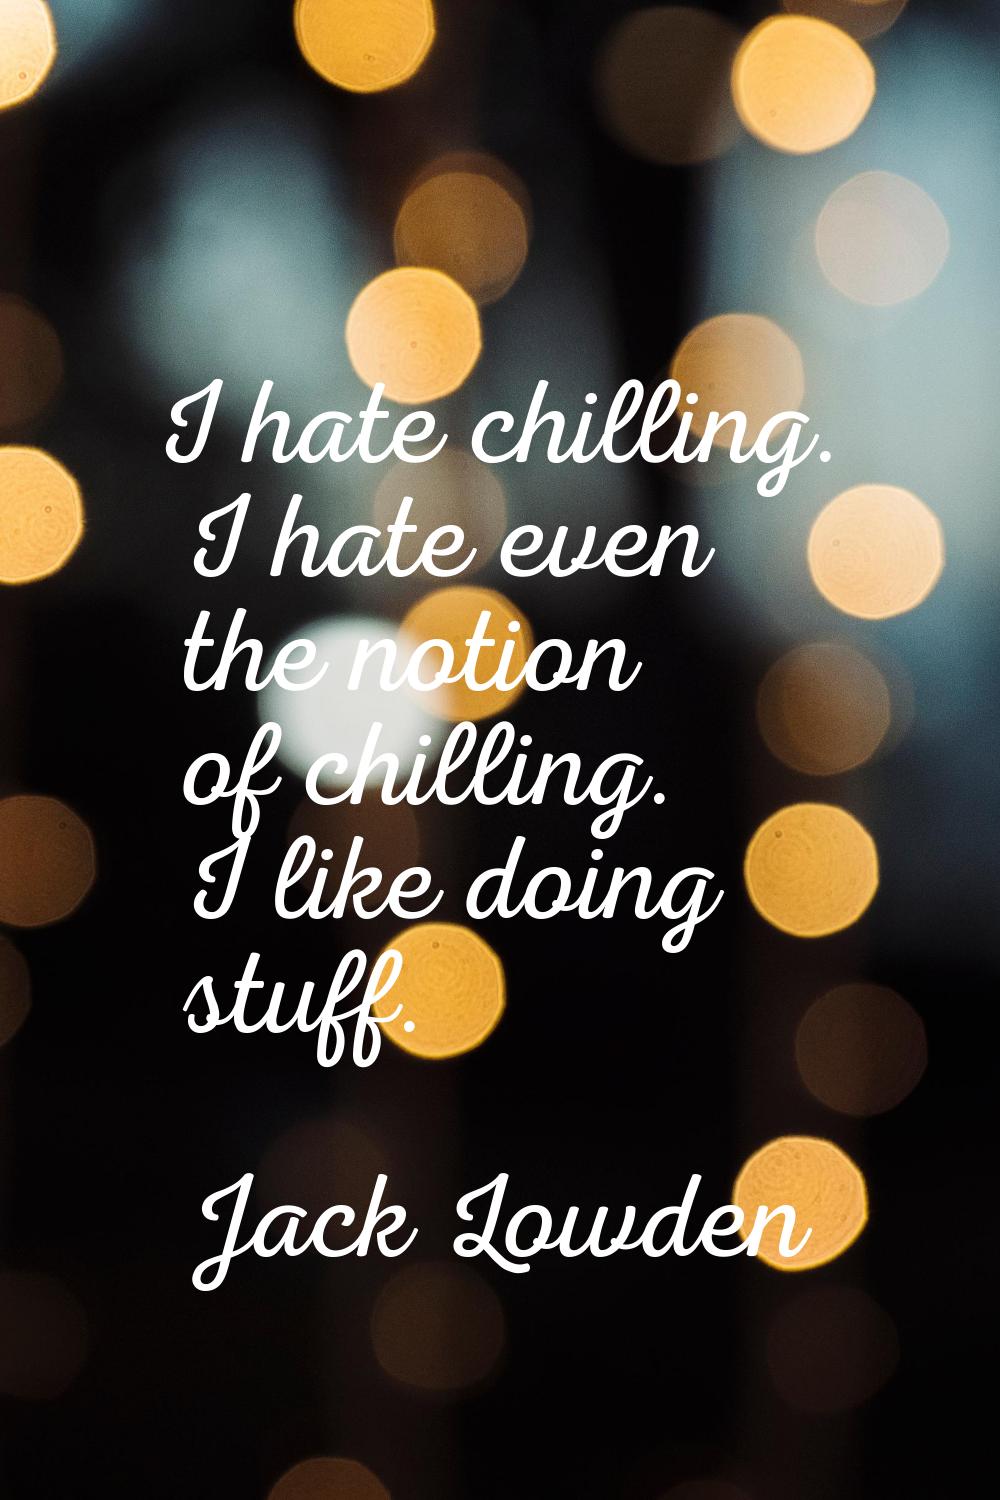 I hate chilling. I hate even the notion of chilling. I like doing stuff.